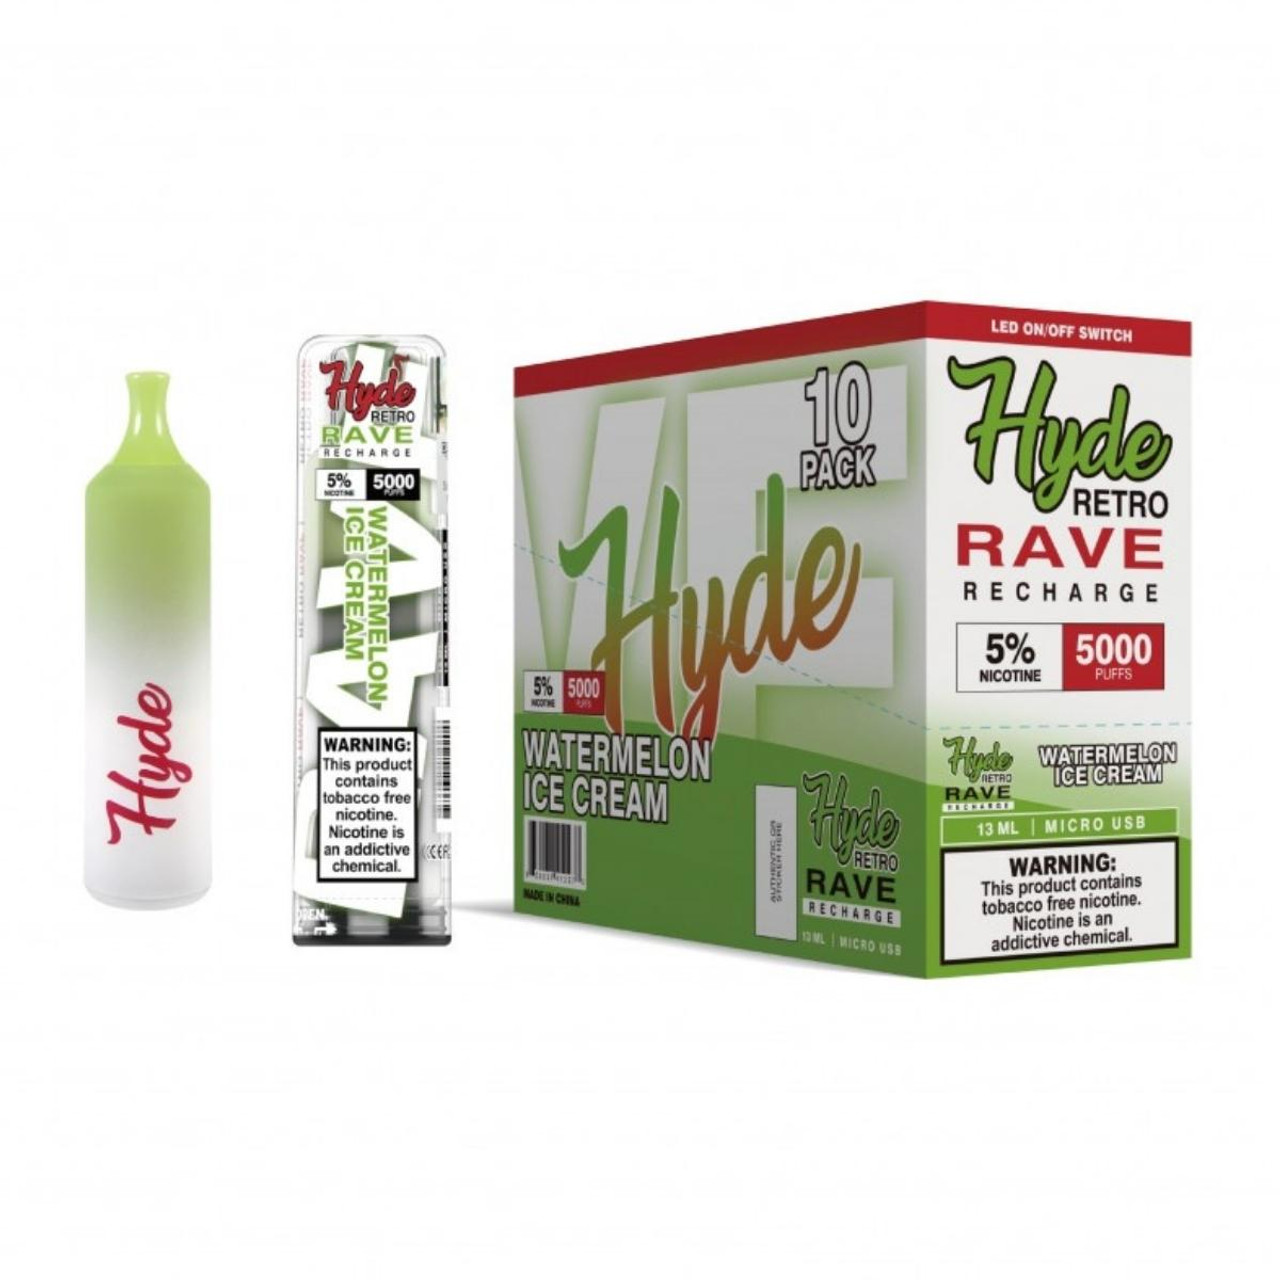 Hyde Retro Rave Recharge Watermelon Ice Cream: A Refreshing Disposable Vape Review